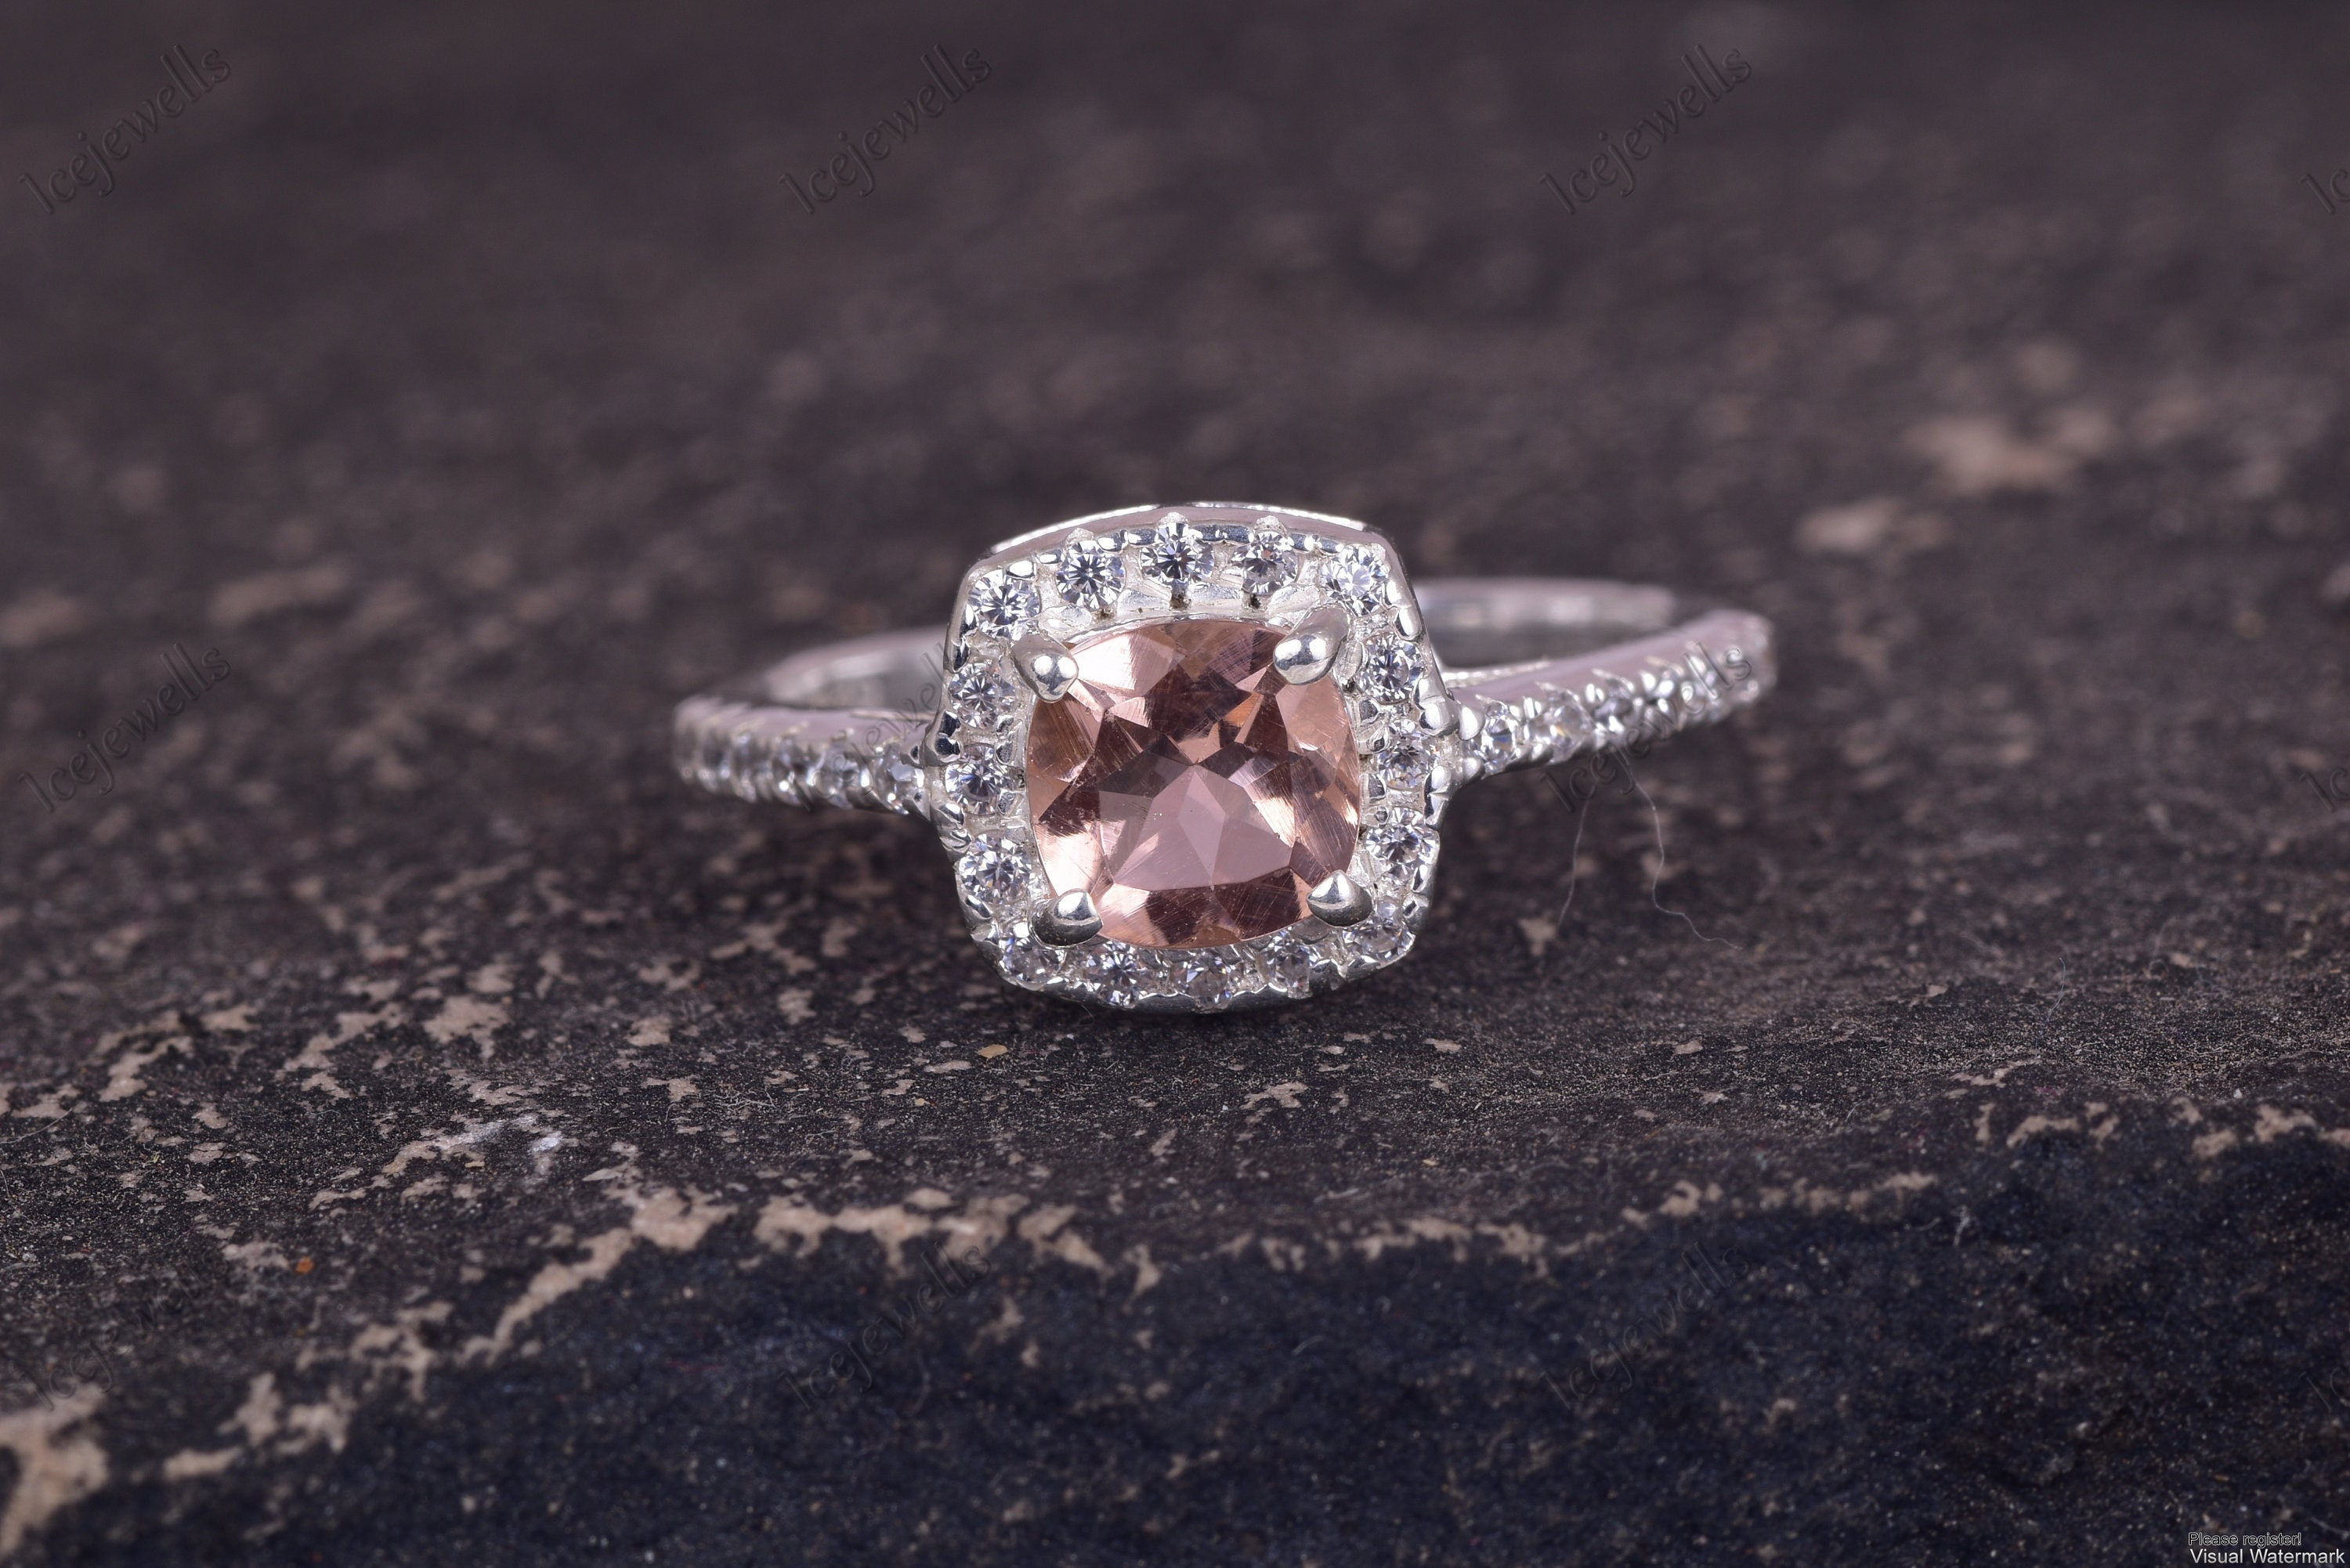 Pink Diamond Ring, Simple Solitaire Engagement Ring, 3 Carats Cushion Cut  Fancy Pink Diamond Simulant Ring, Pastel Pink Diamond Promise Ring 